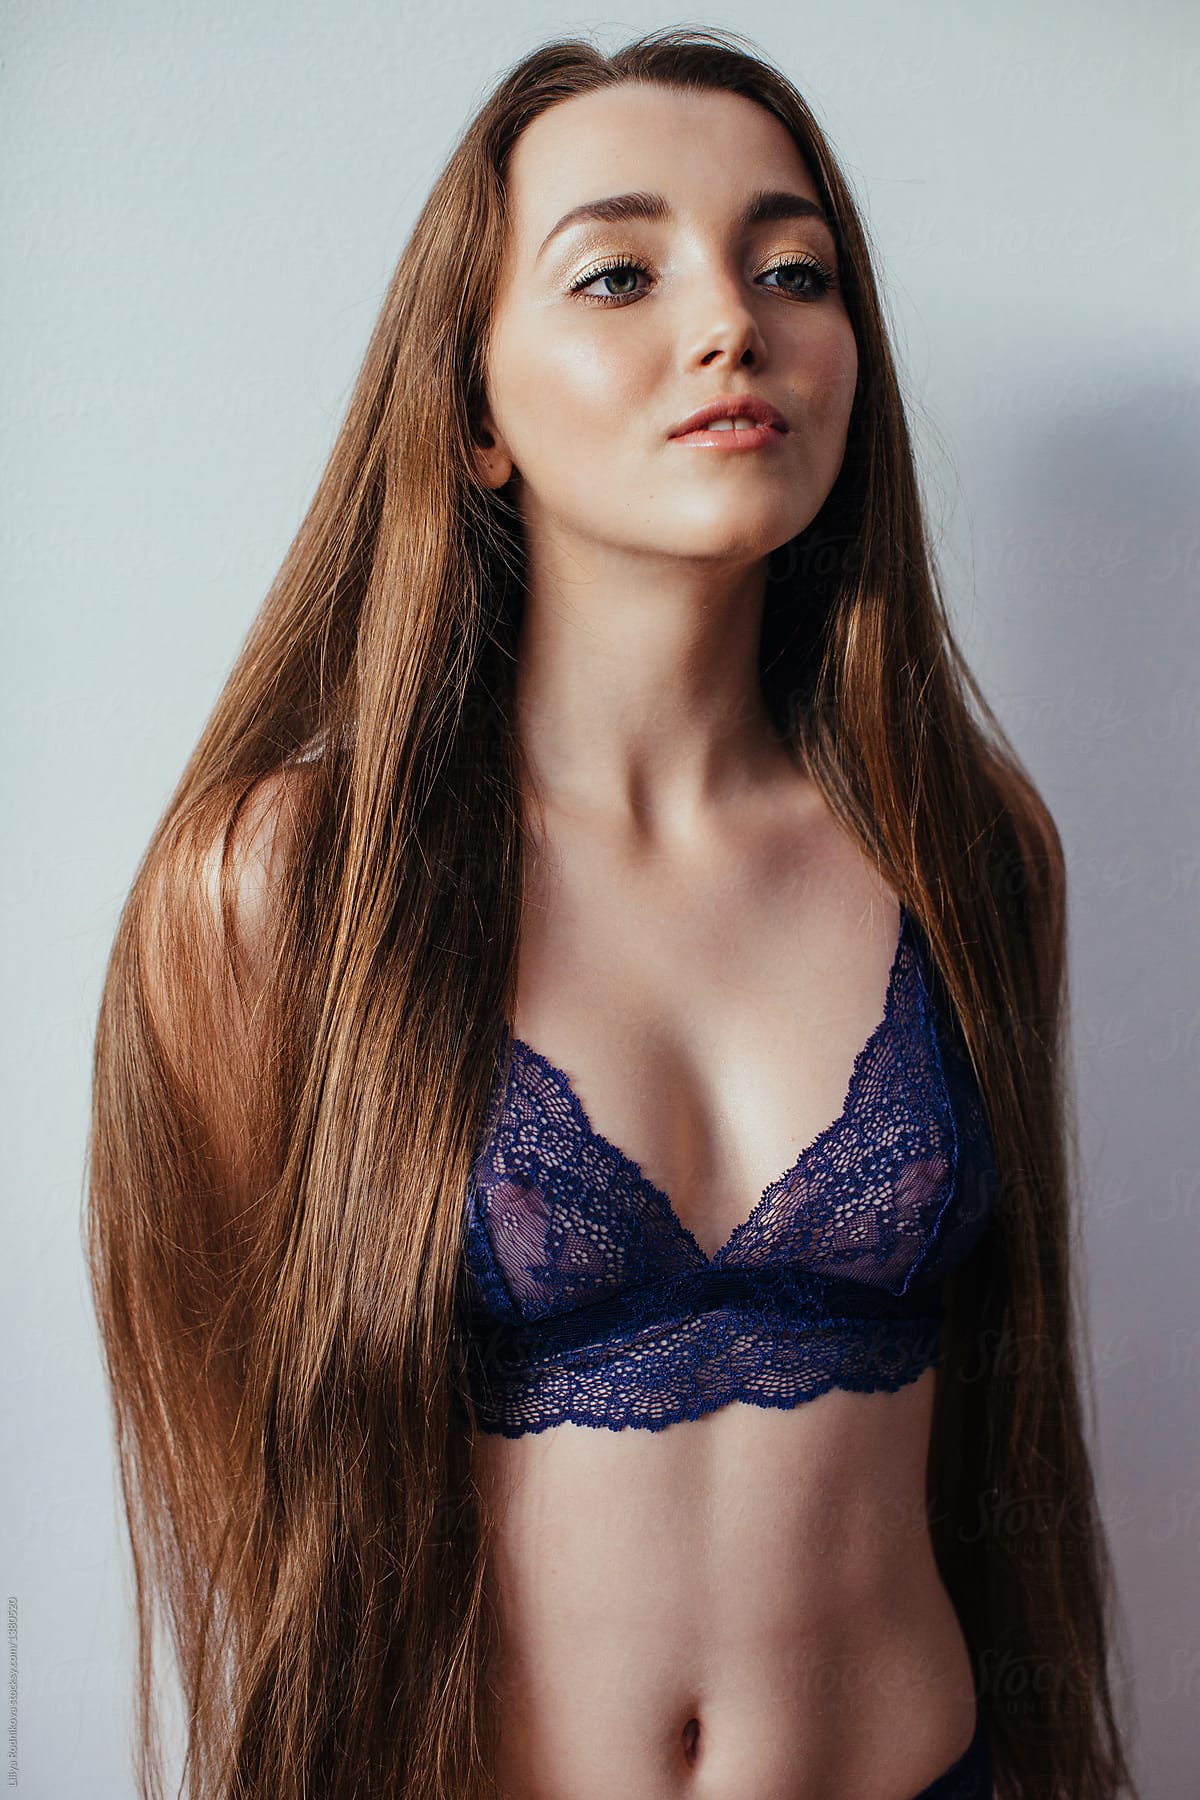 Portrait Of Young Beautiful Smiling Female With Long Hair In White Lace Bra  by Stocksy Contributor Liliya Rodnikova - Stocksy